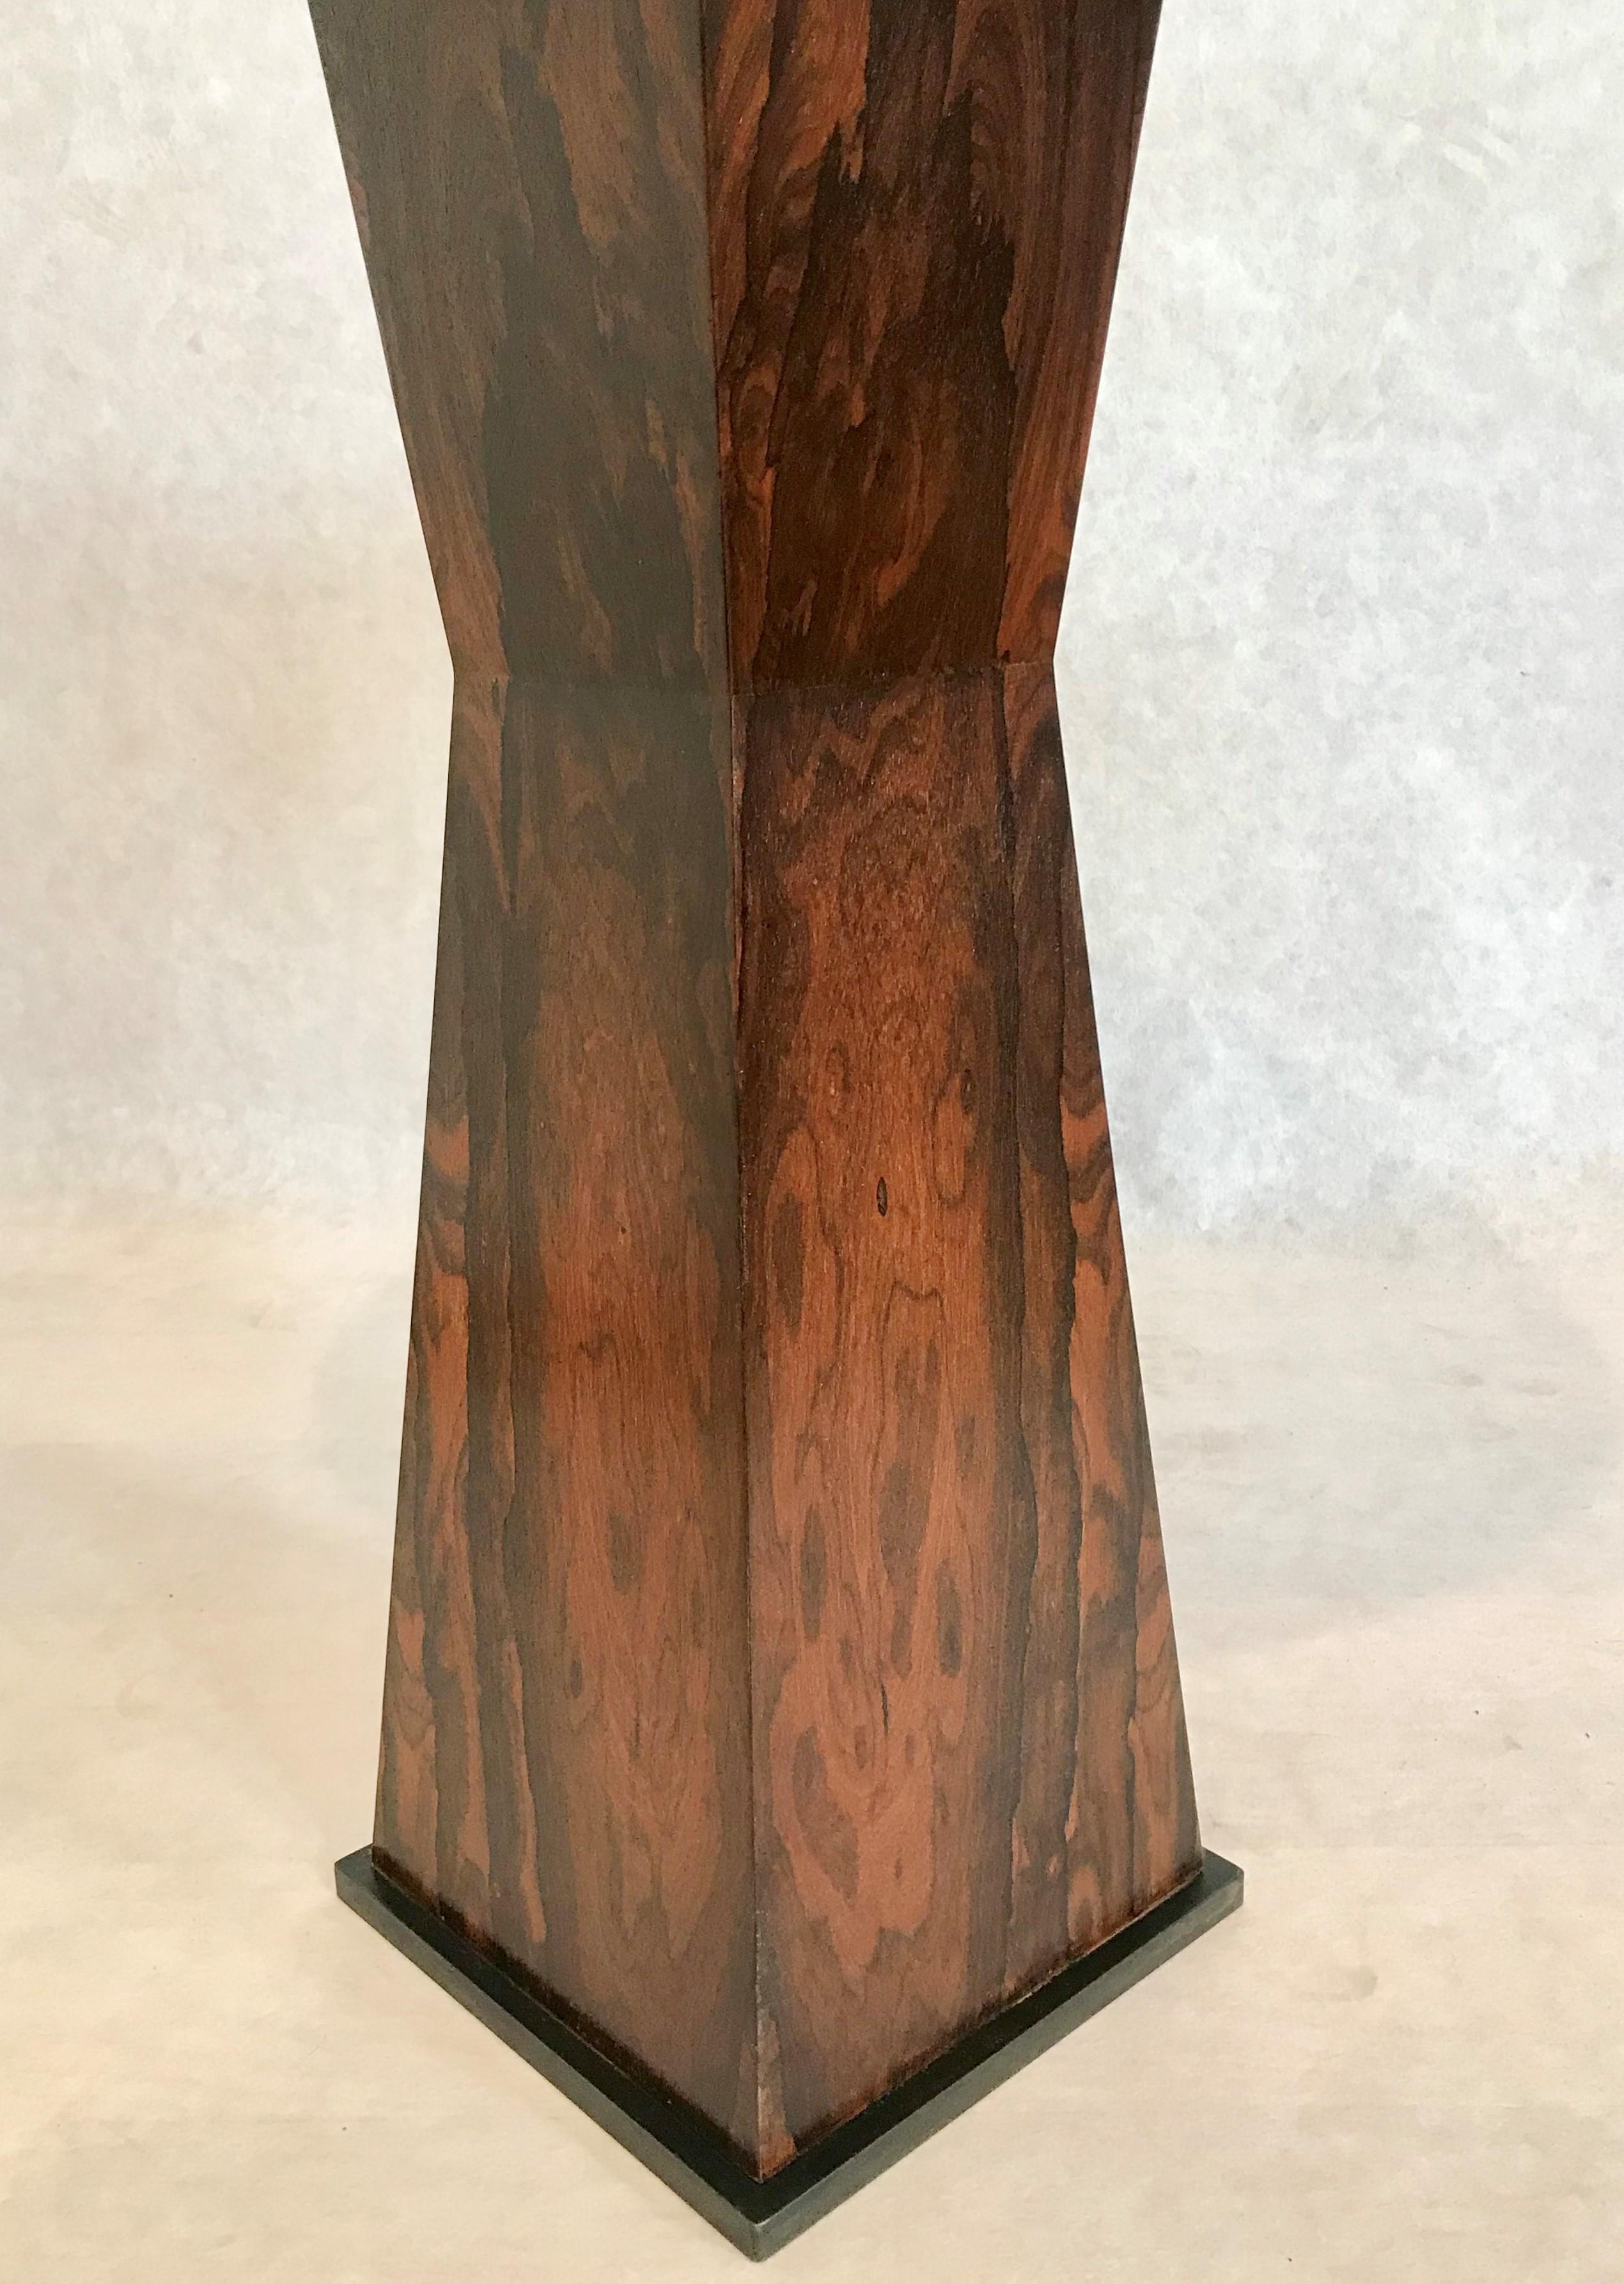 Side table in Zircote wood, absolute black granite and blackened steel

Picture item is available now for the Holidays.
25% off. 

Customizable design.